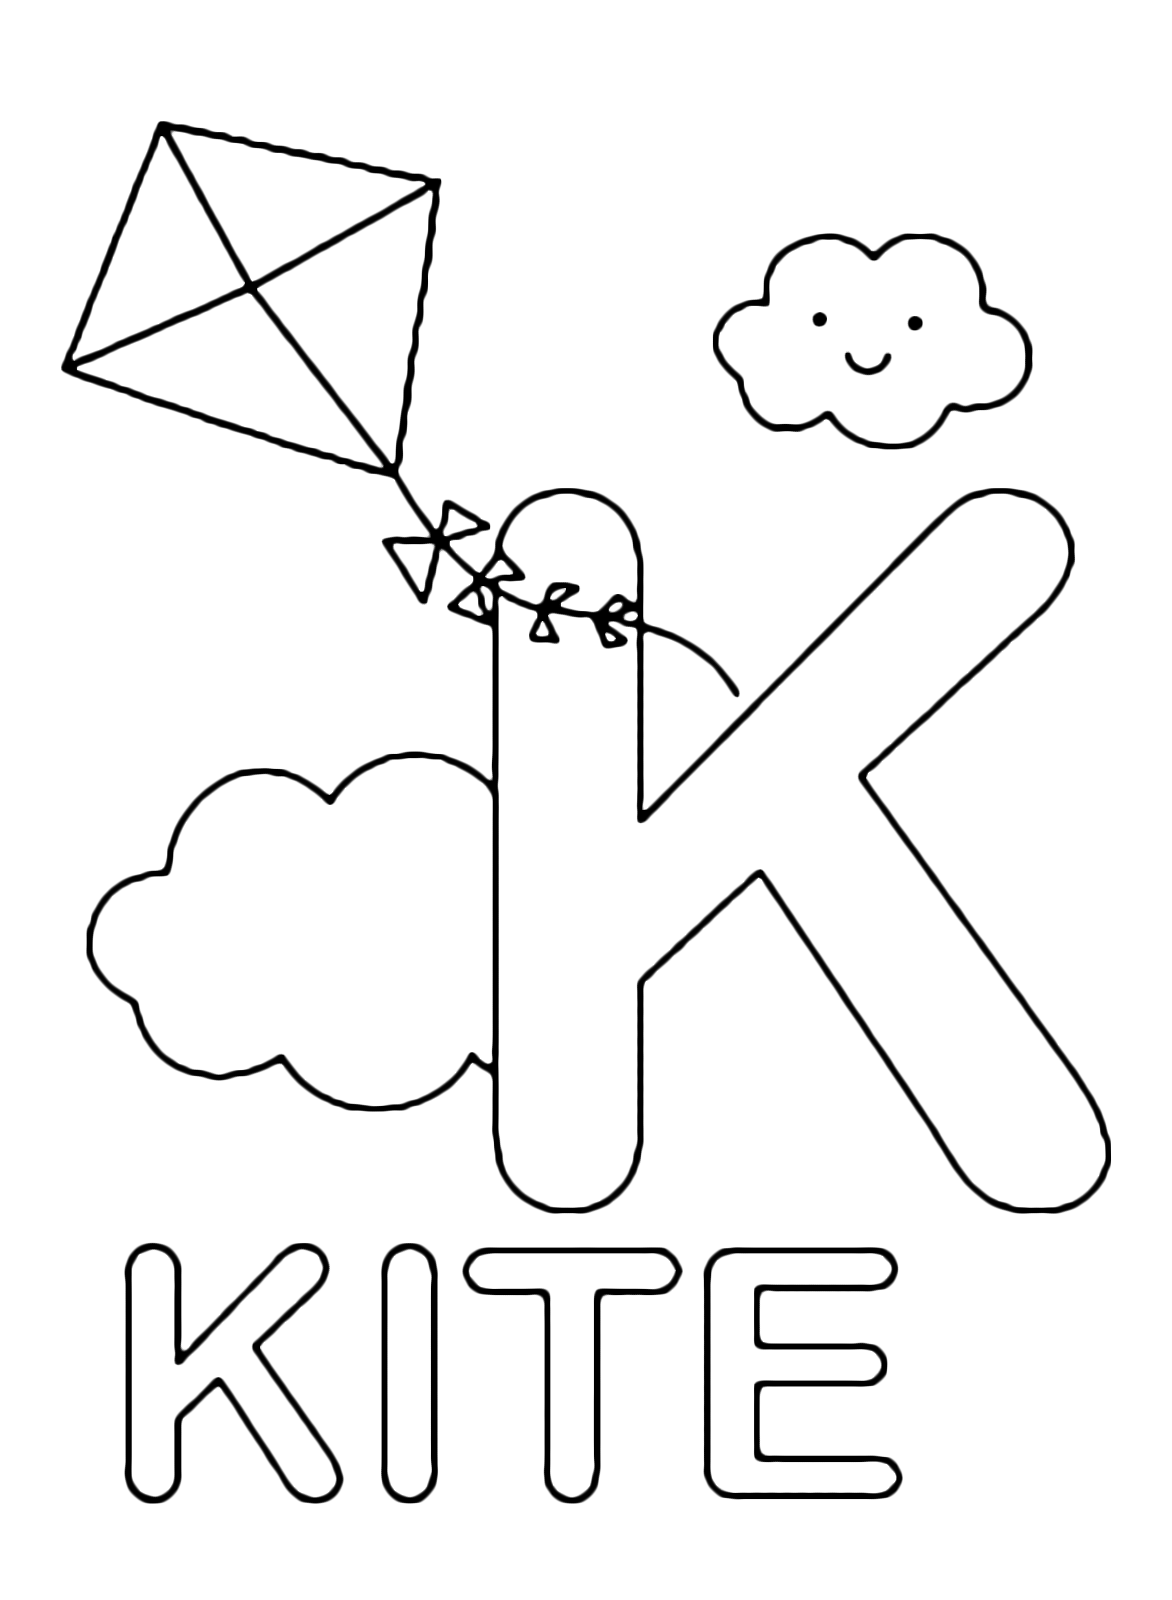 Letters and numbers - K for kite uppercase letter